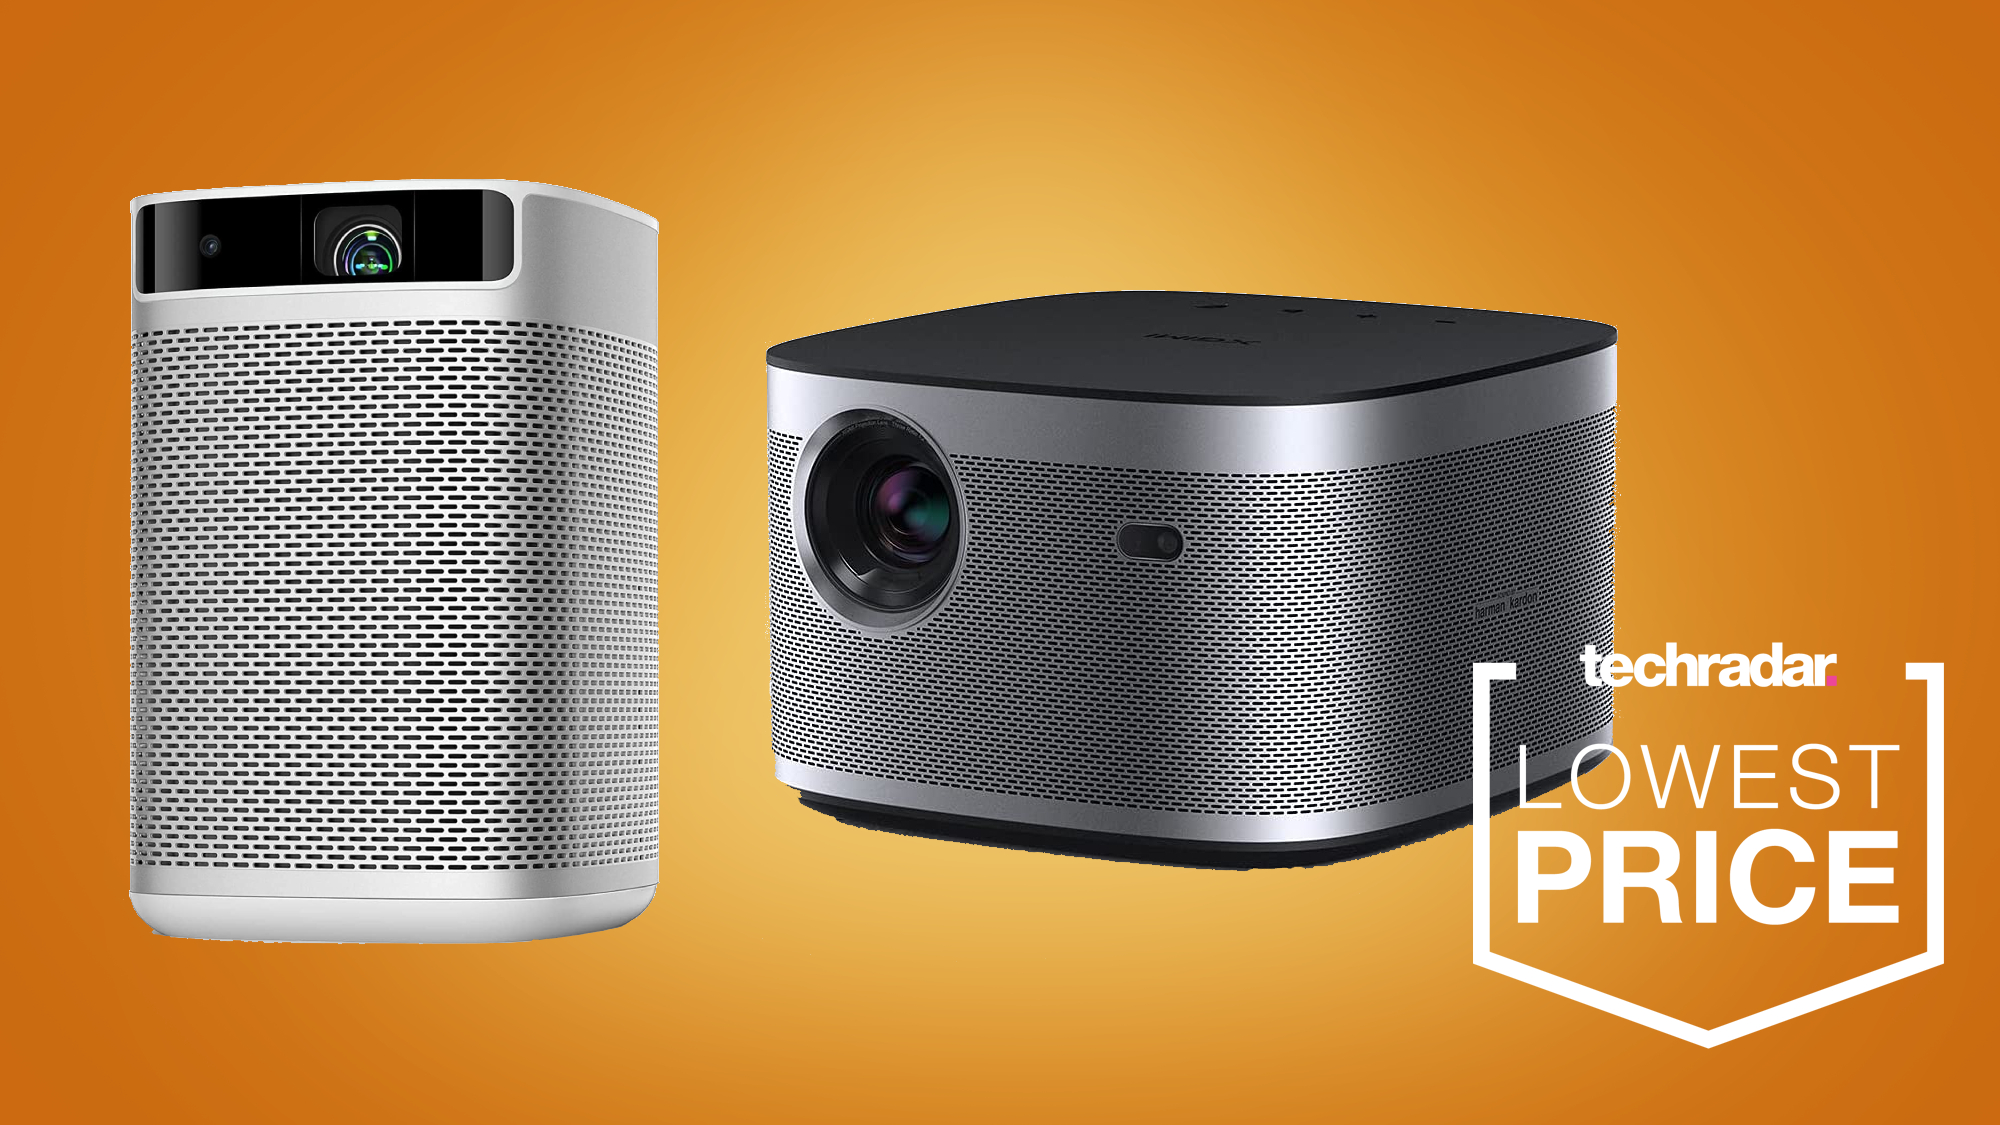 These XGIMI projector deals are at the lowest price we've seen yet